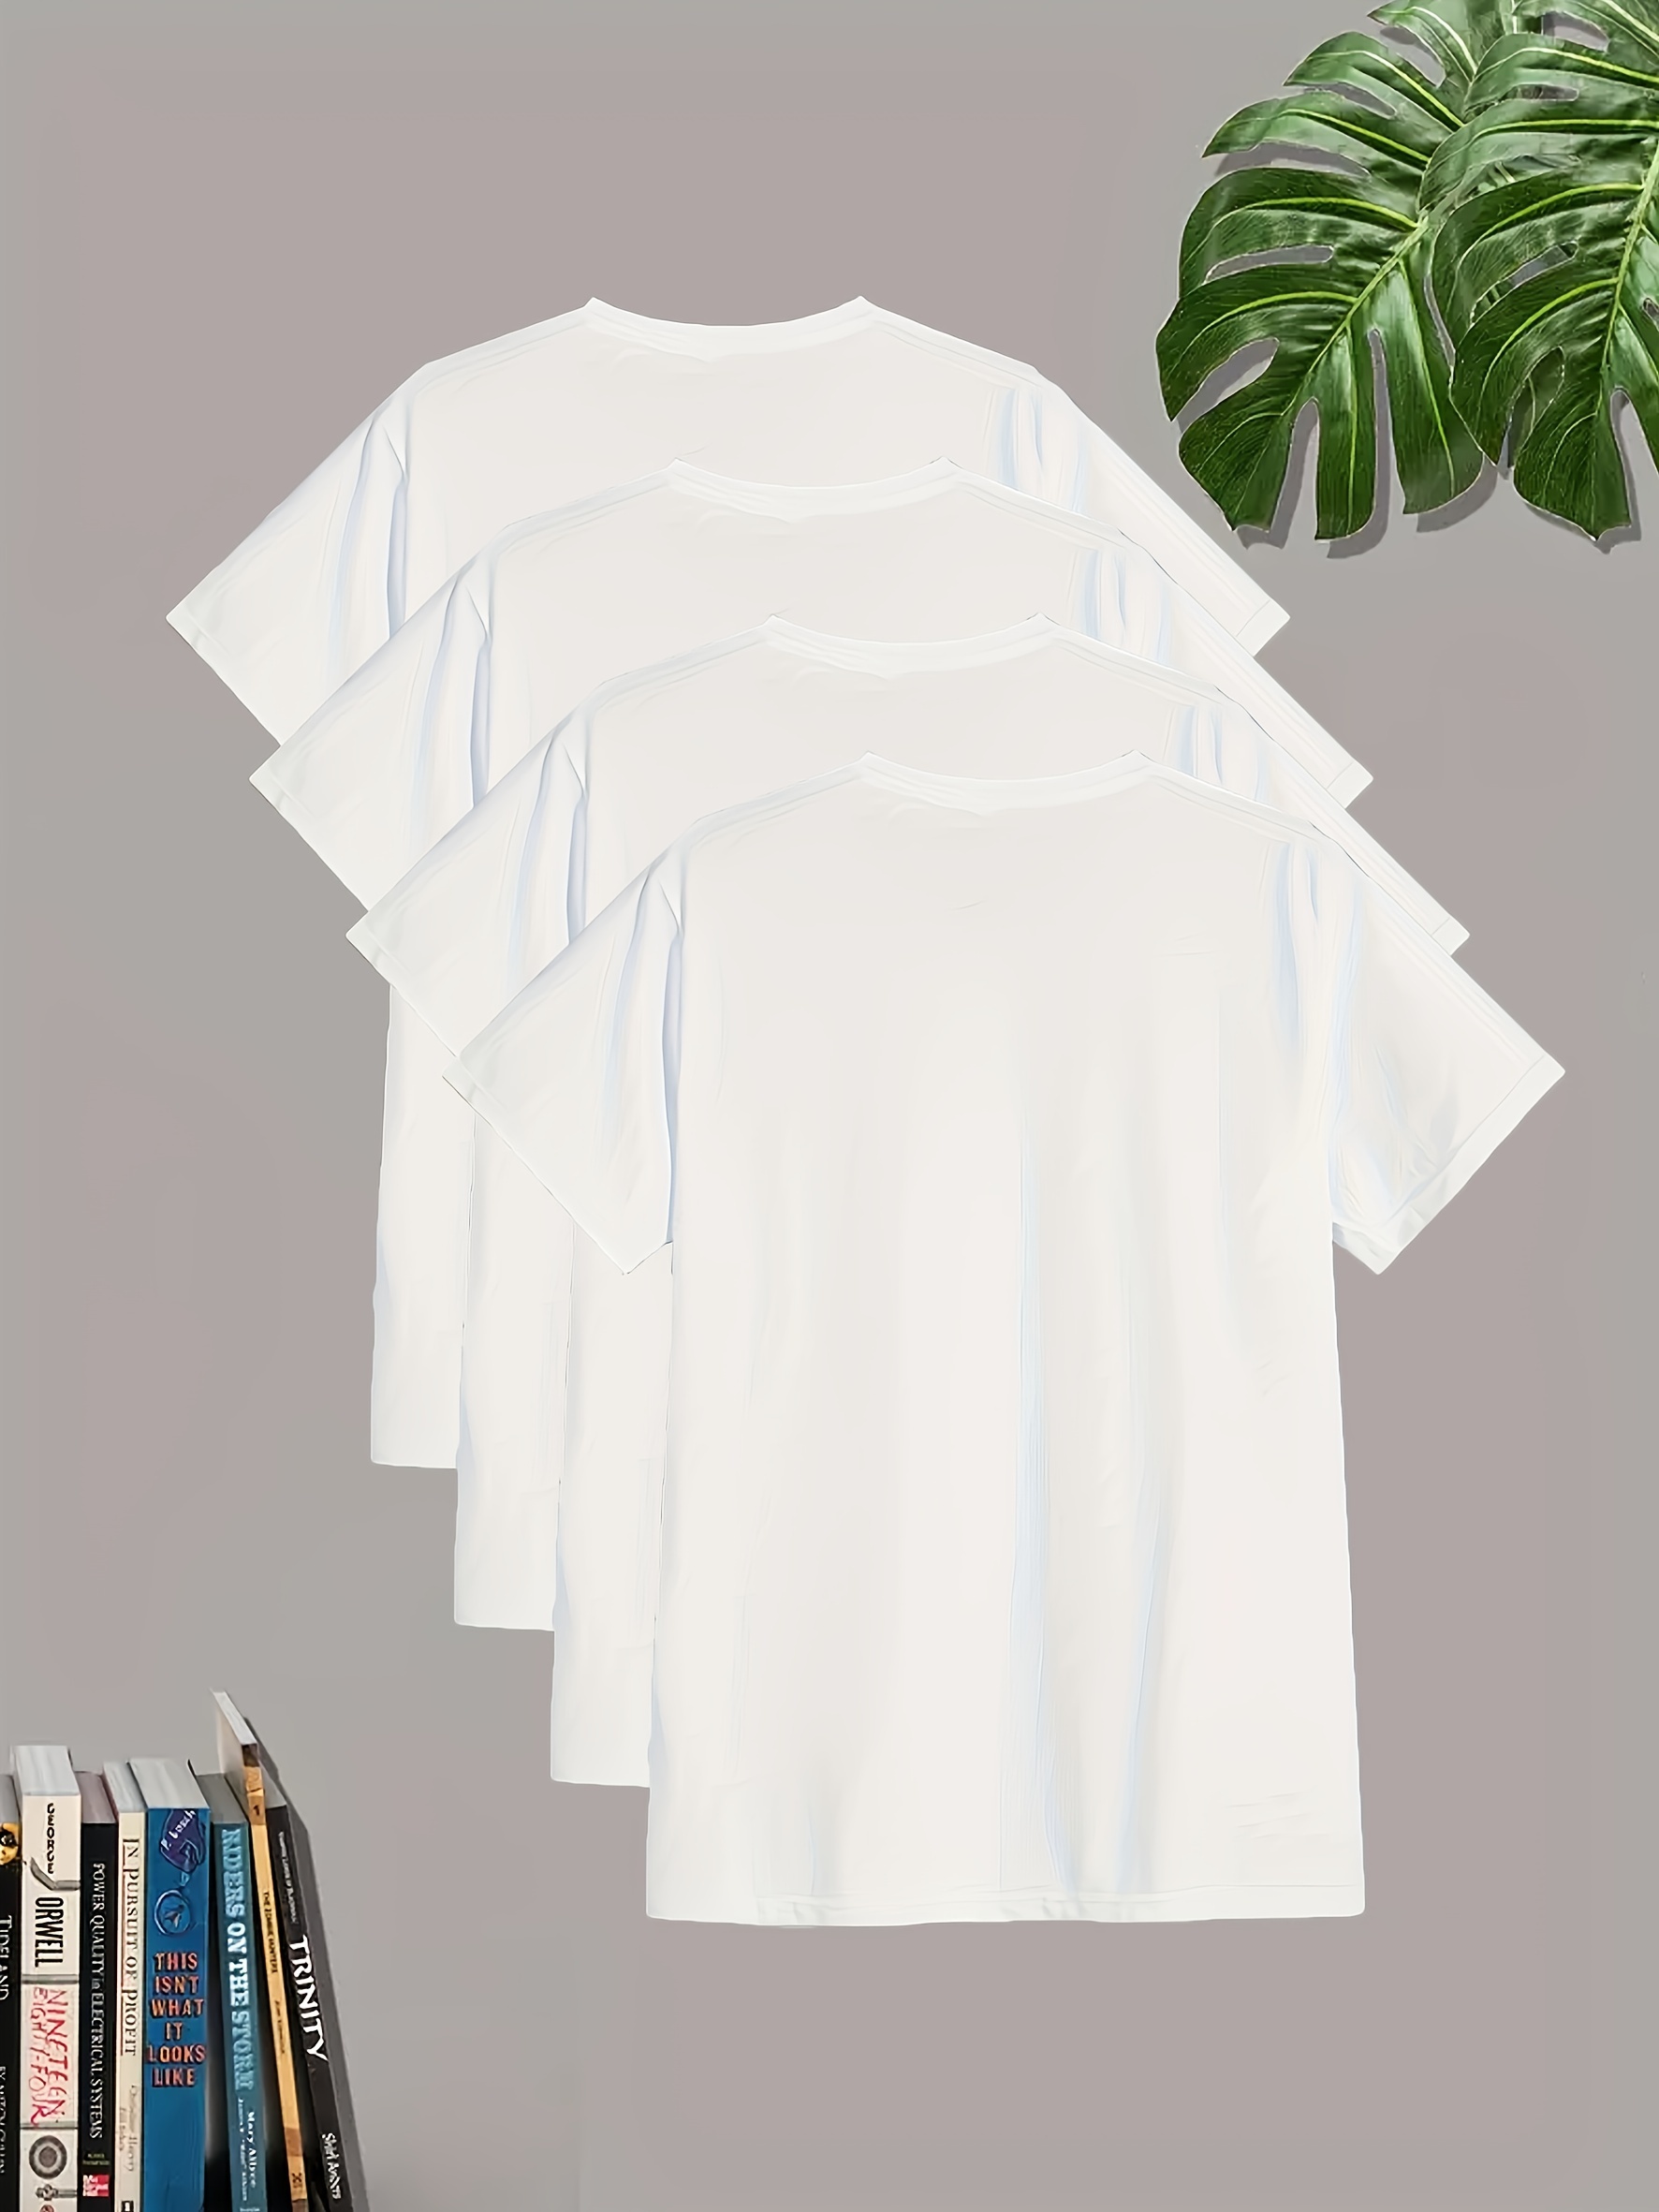 Jetec 4 Pieces Sublimation Blank White T-Shirt Polyester Blank Short Sleeve T-Shirt for Children